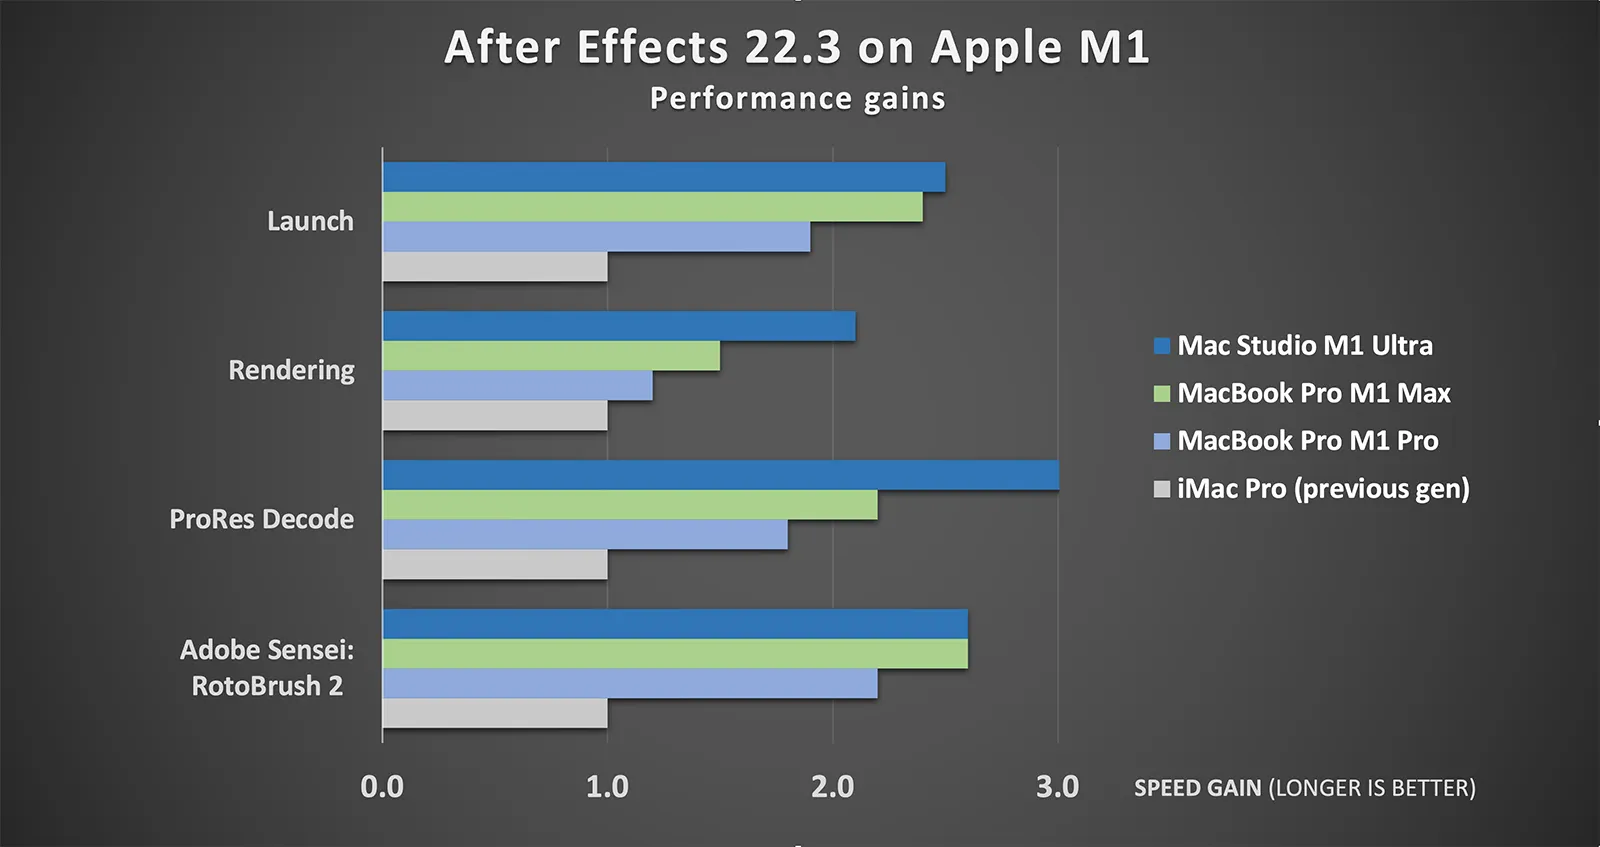 After Effect 22.3 on Apple M1 performance gains graph. 